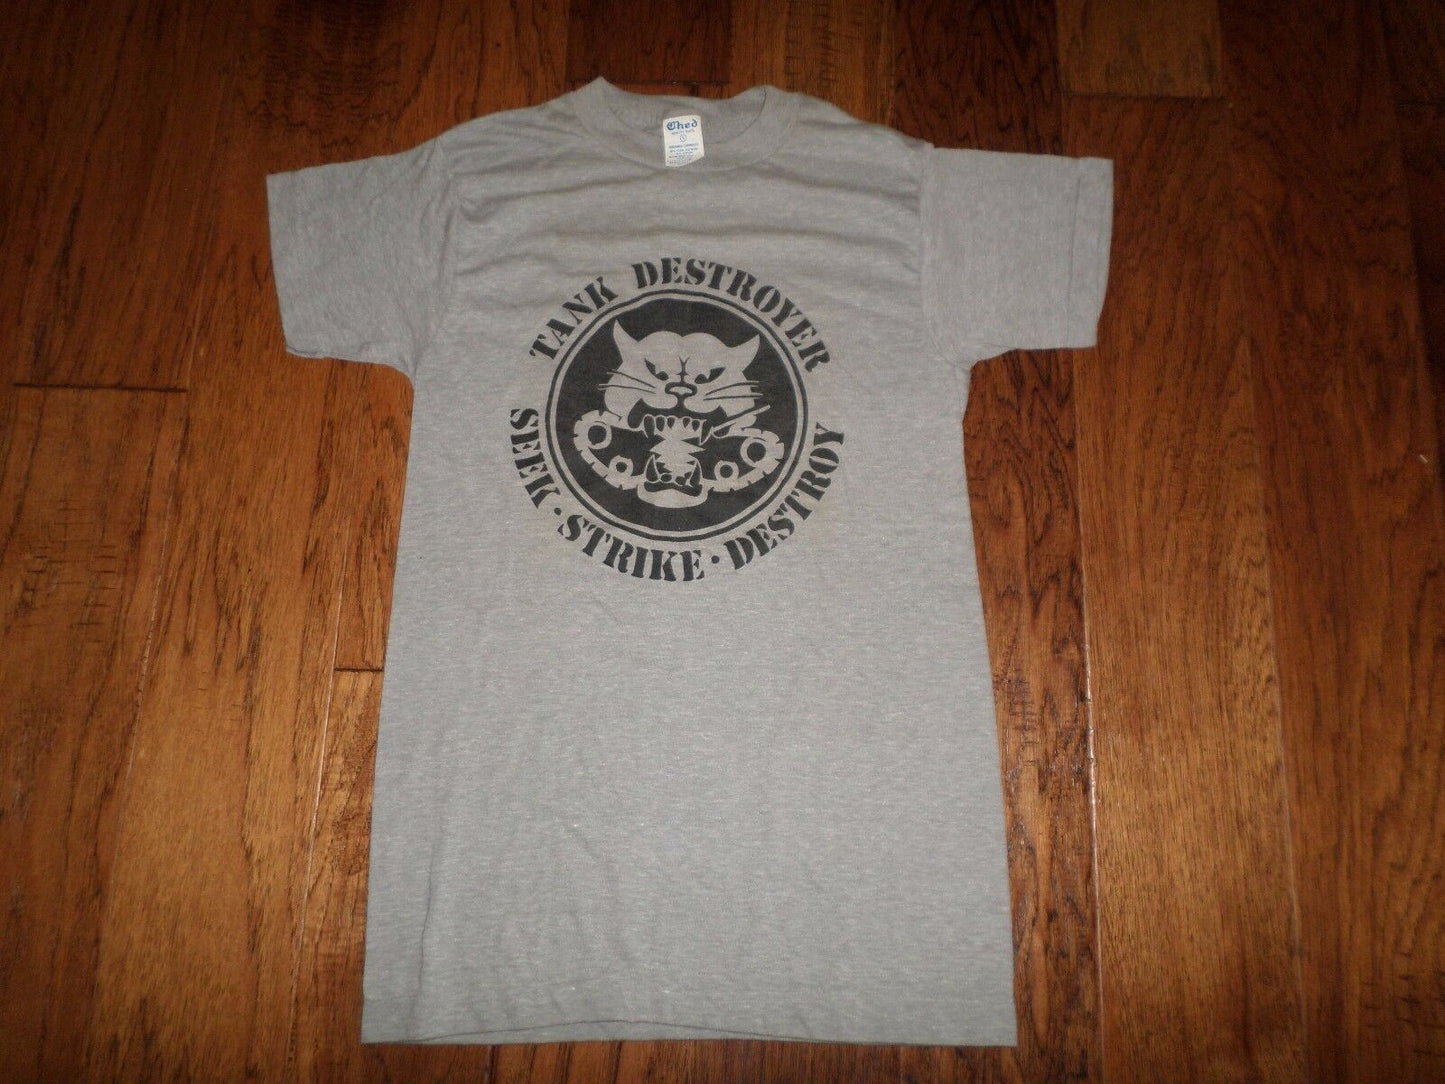 VINTAGE MILITARY TANK DESTROYER T- SHIRT MADE IN THE U.S.A BY T CHED SIZE SMALL